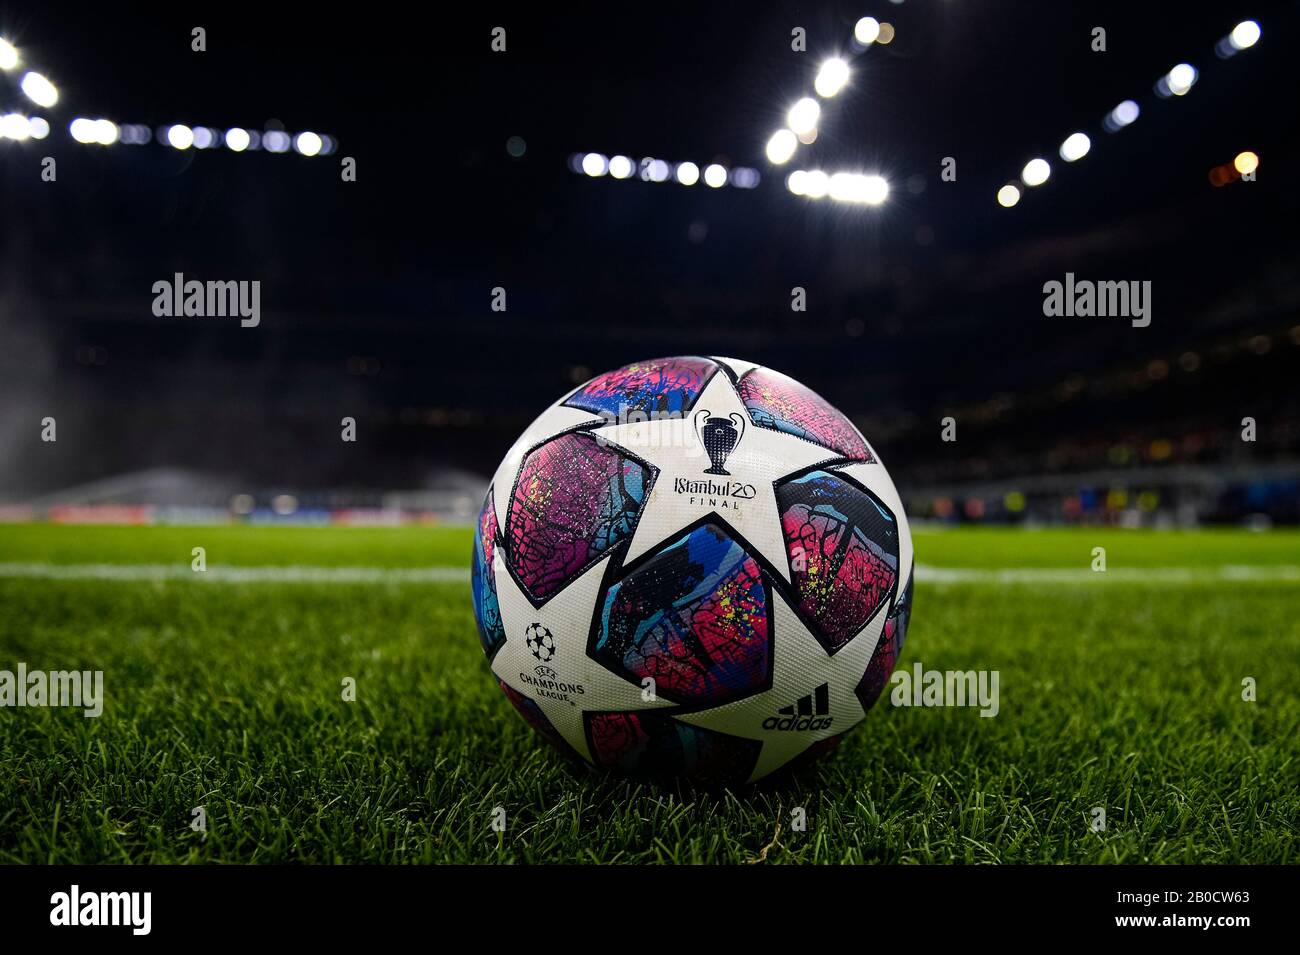 Milan, Italy - 19 February, 2020: The 'Istanbul 20' official Adidas match  ball for 2020 UEFA Champions League final is pictured prior to the UEFA Champions  League round of 16 first leg